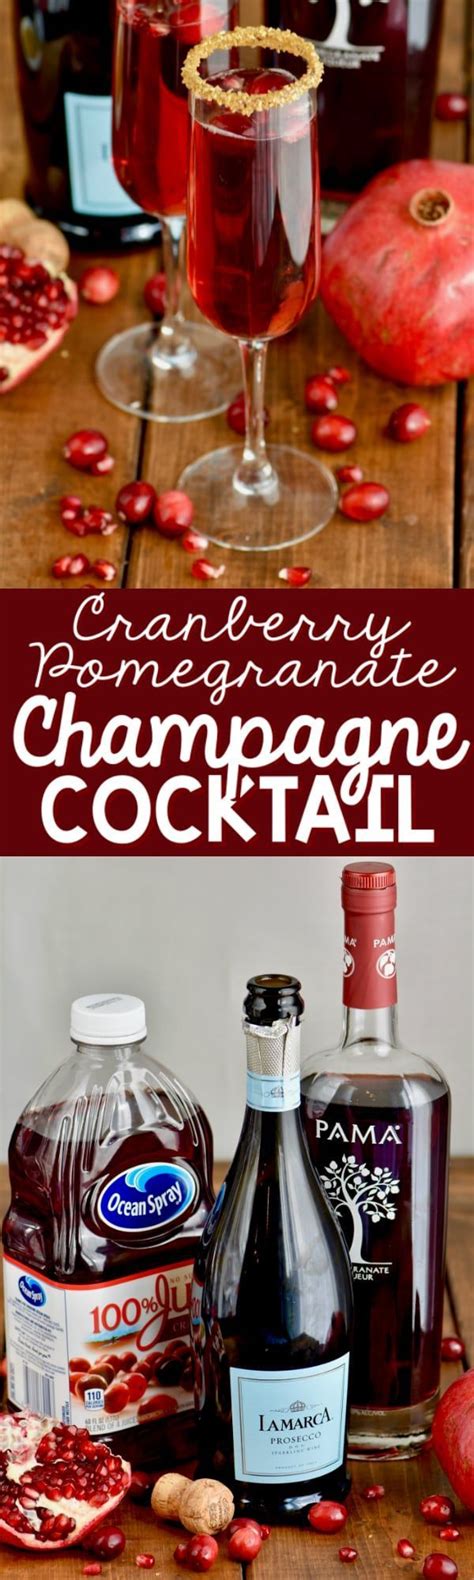 40 festive champagne cocktails to sip on new year's eve letters@purewow.com christmas cranberry champagne cocktails these cocktails are full of all the flavors and sights of the season. This Cranberry Pomegranate Champagne Cocktail is the perfect holiday drink! Made with ...